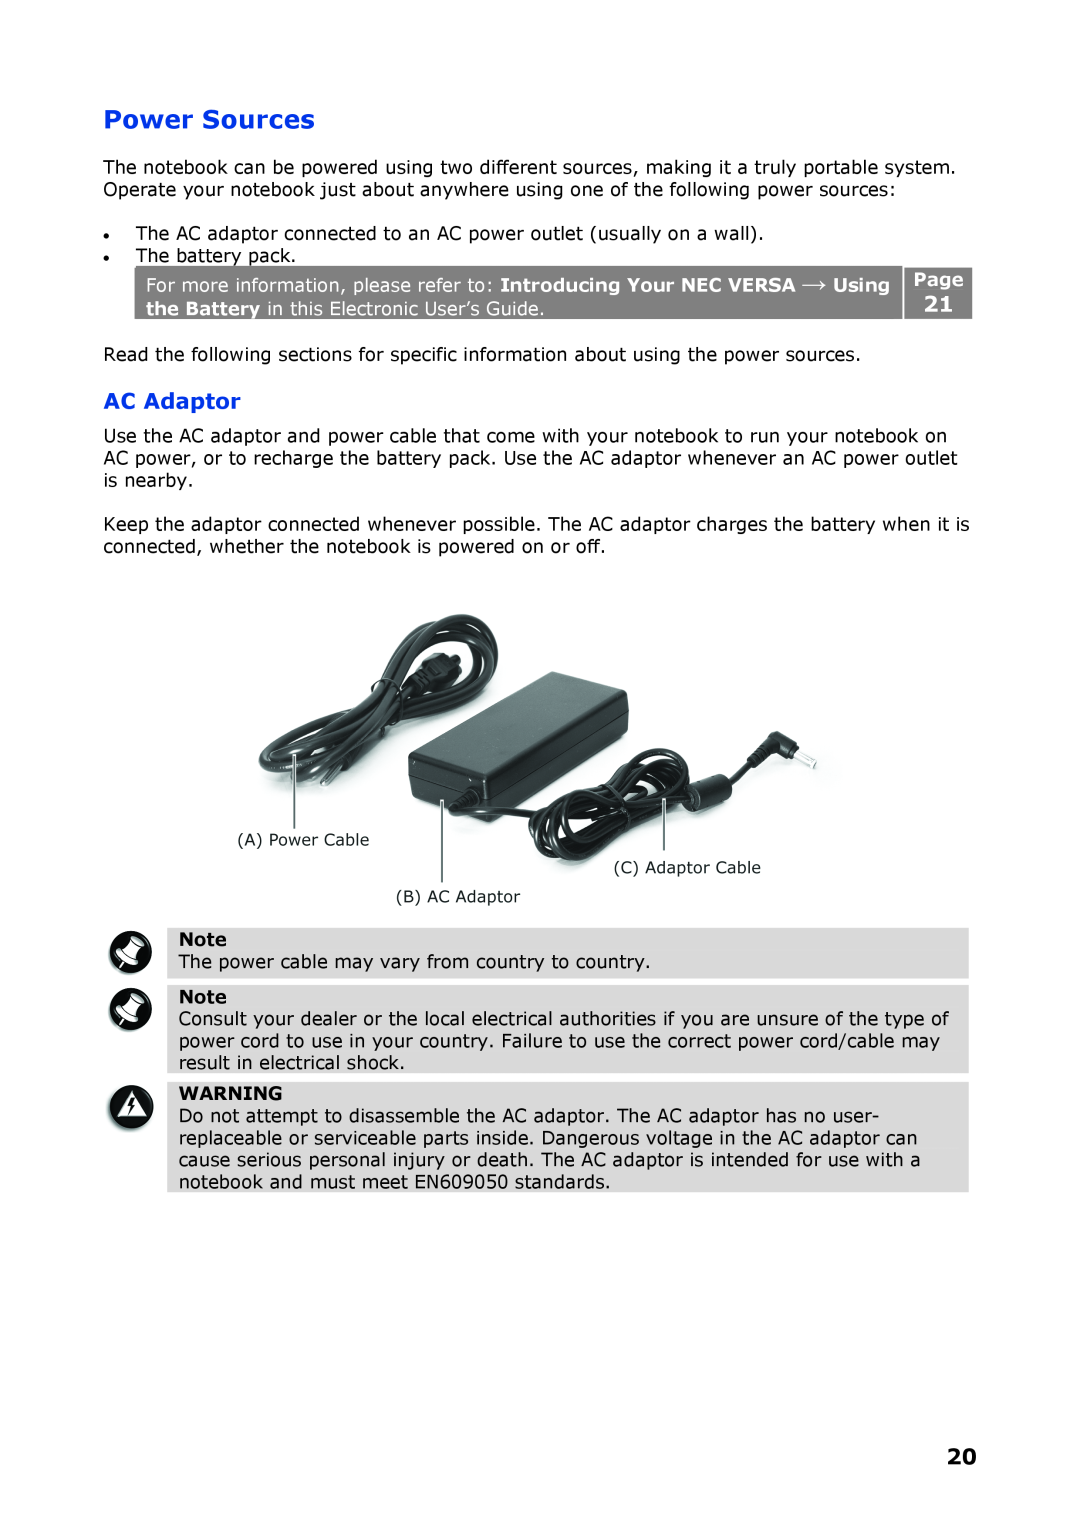 NEC P8510 manual Power Sources, AC Adaptor, the Battery in this Electronic User’s Guide, Page 